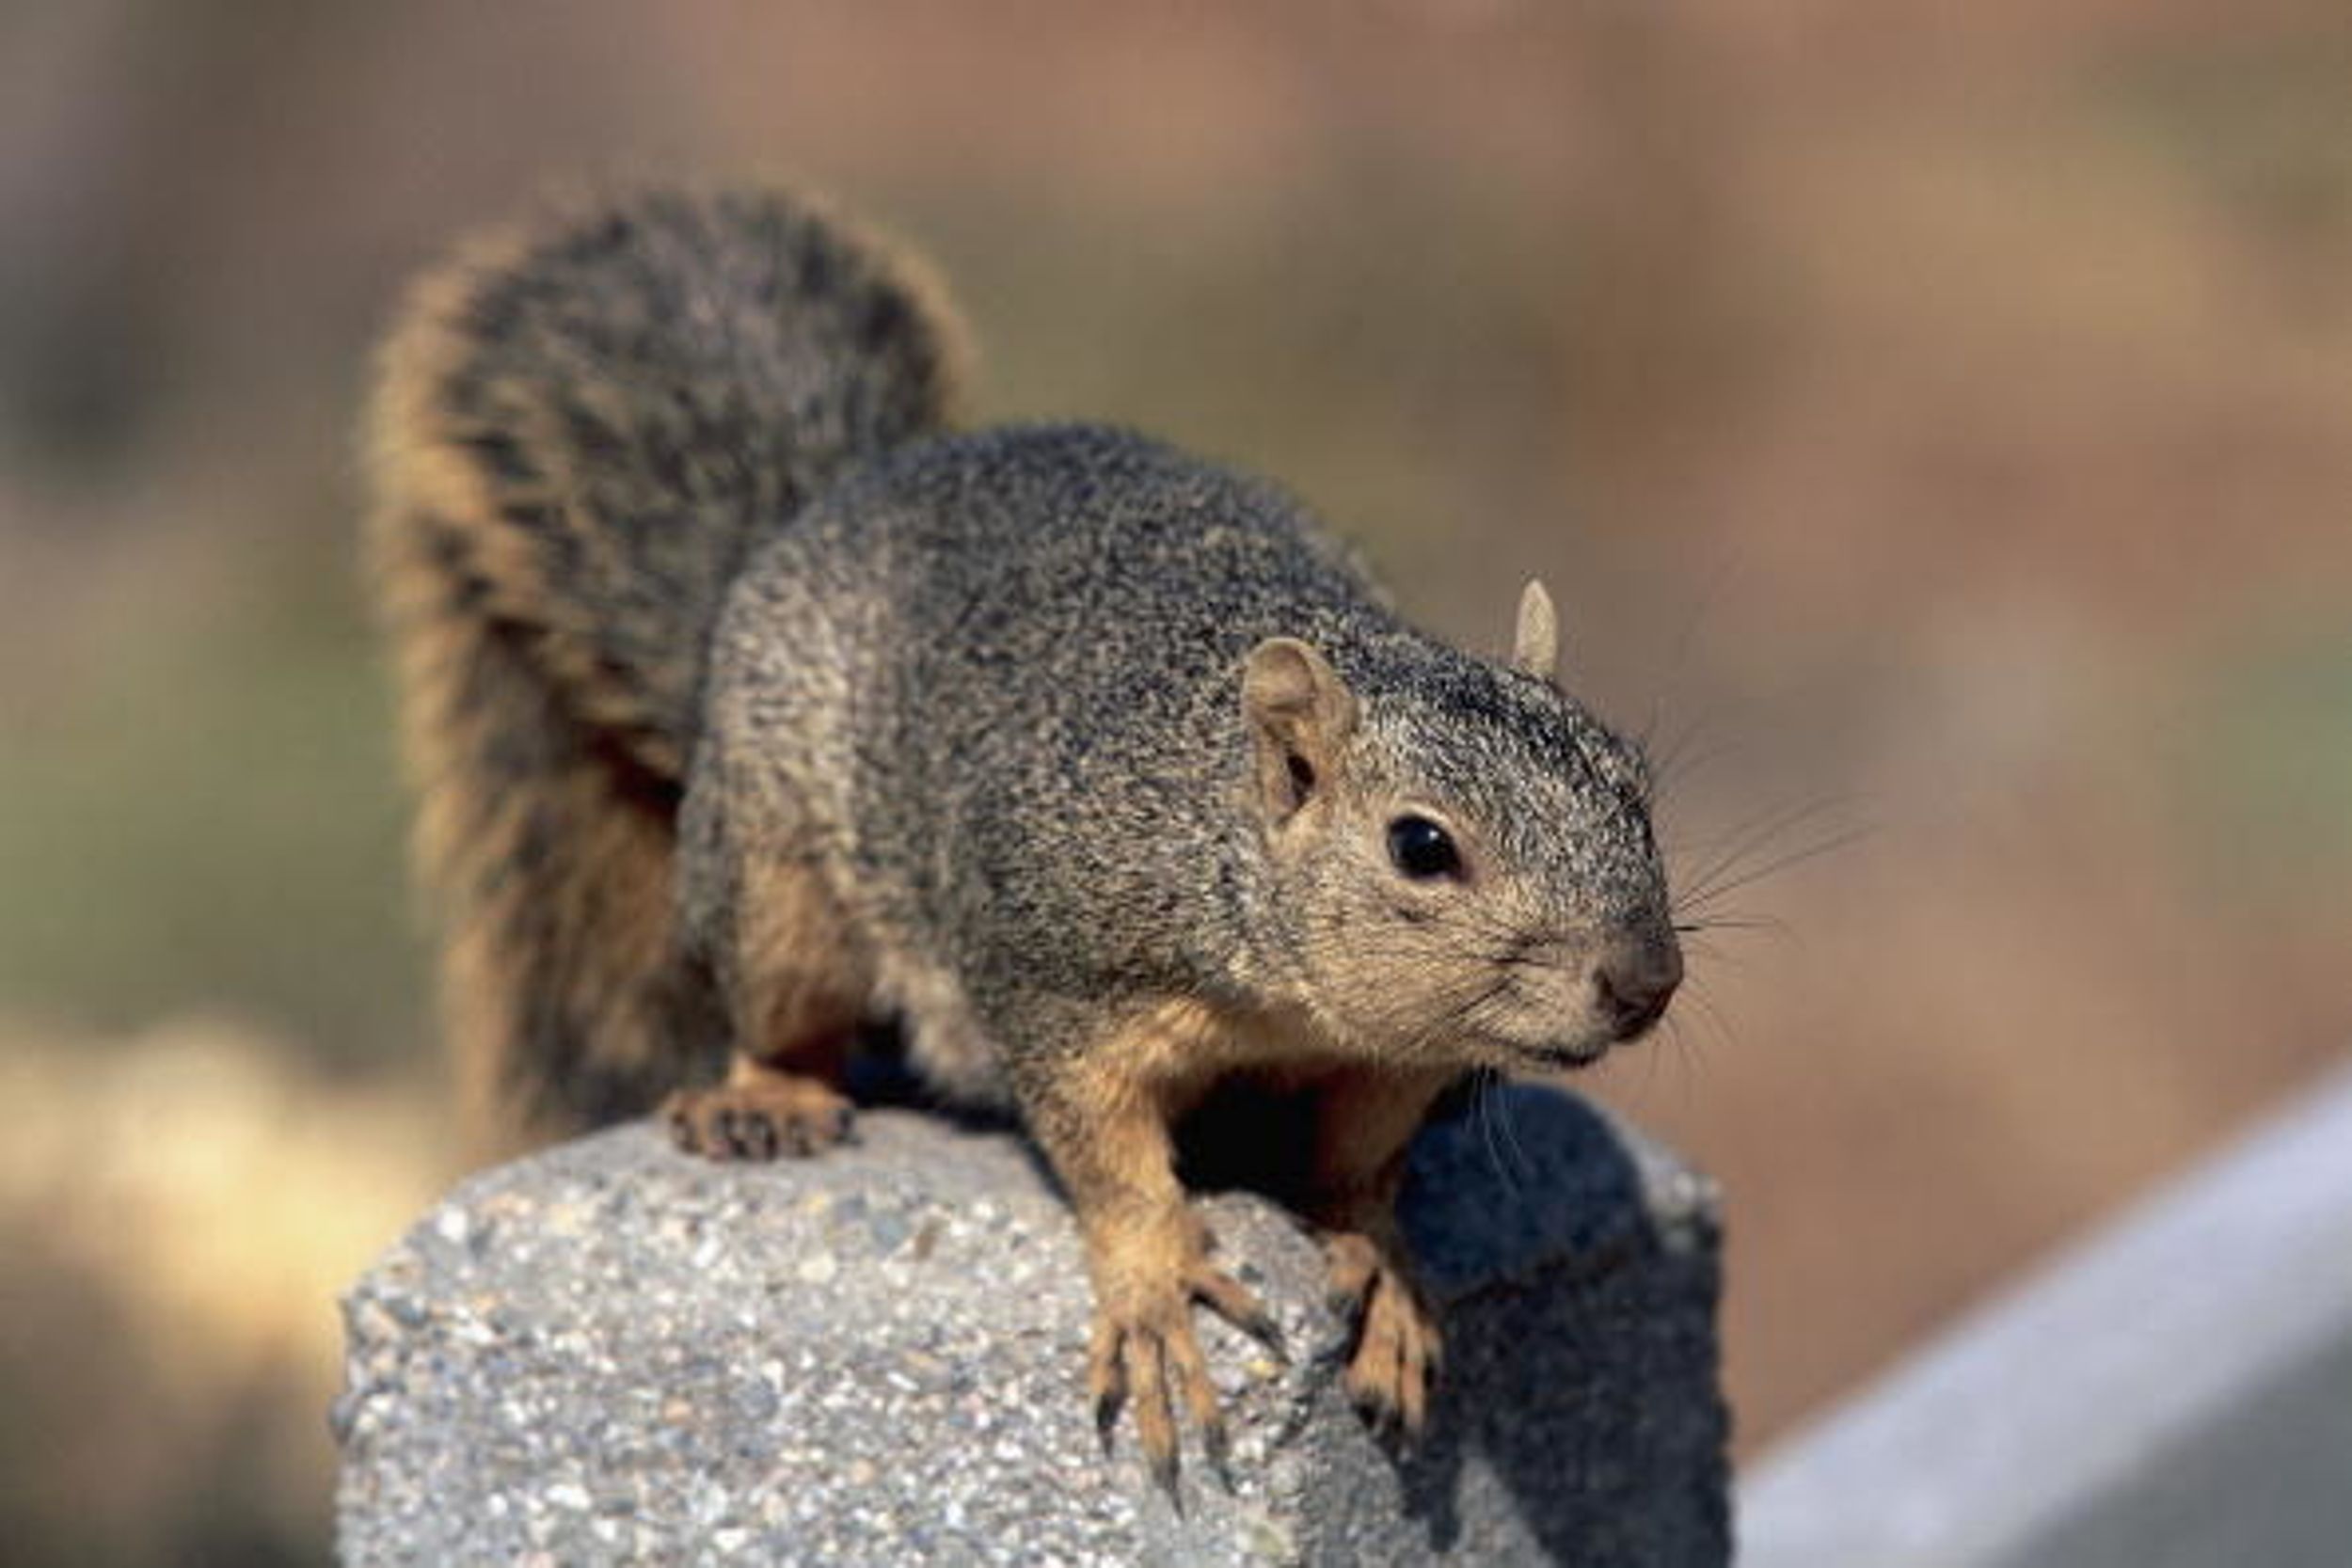 Woman Calls The Cops About A Burglar In Her House Only To Find Out It Was A 'Rogue Squirrel' 🐿